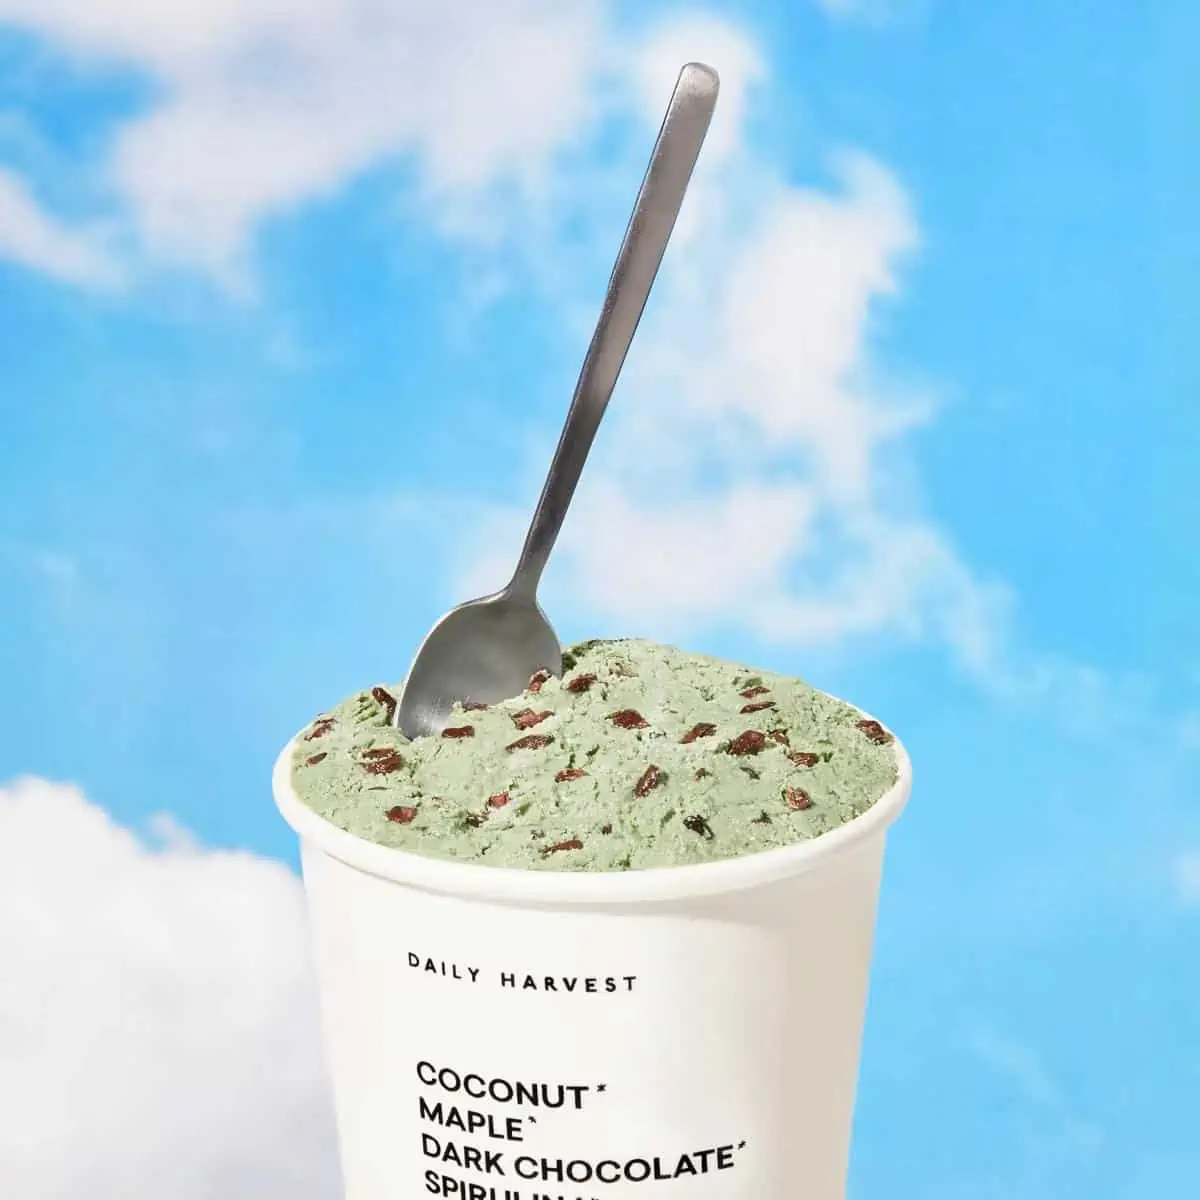 A pint of Daily Harvest scoop mint chocolate flavor with a spoon scooping into it.